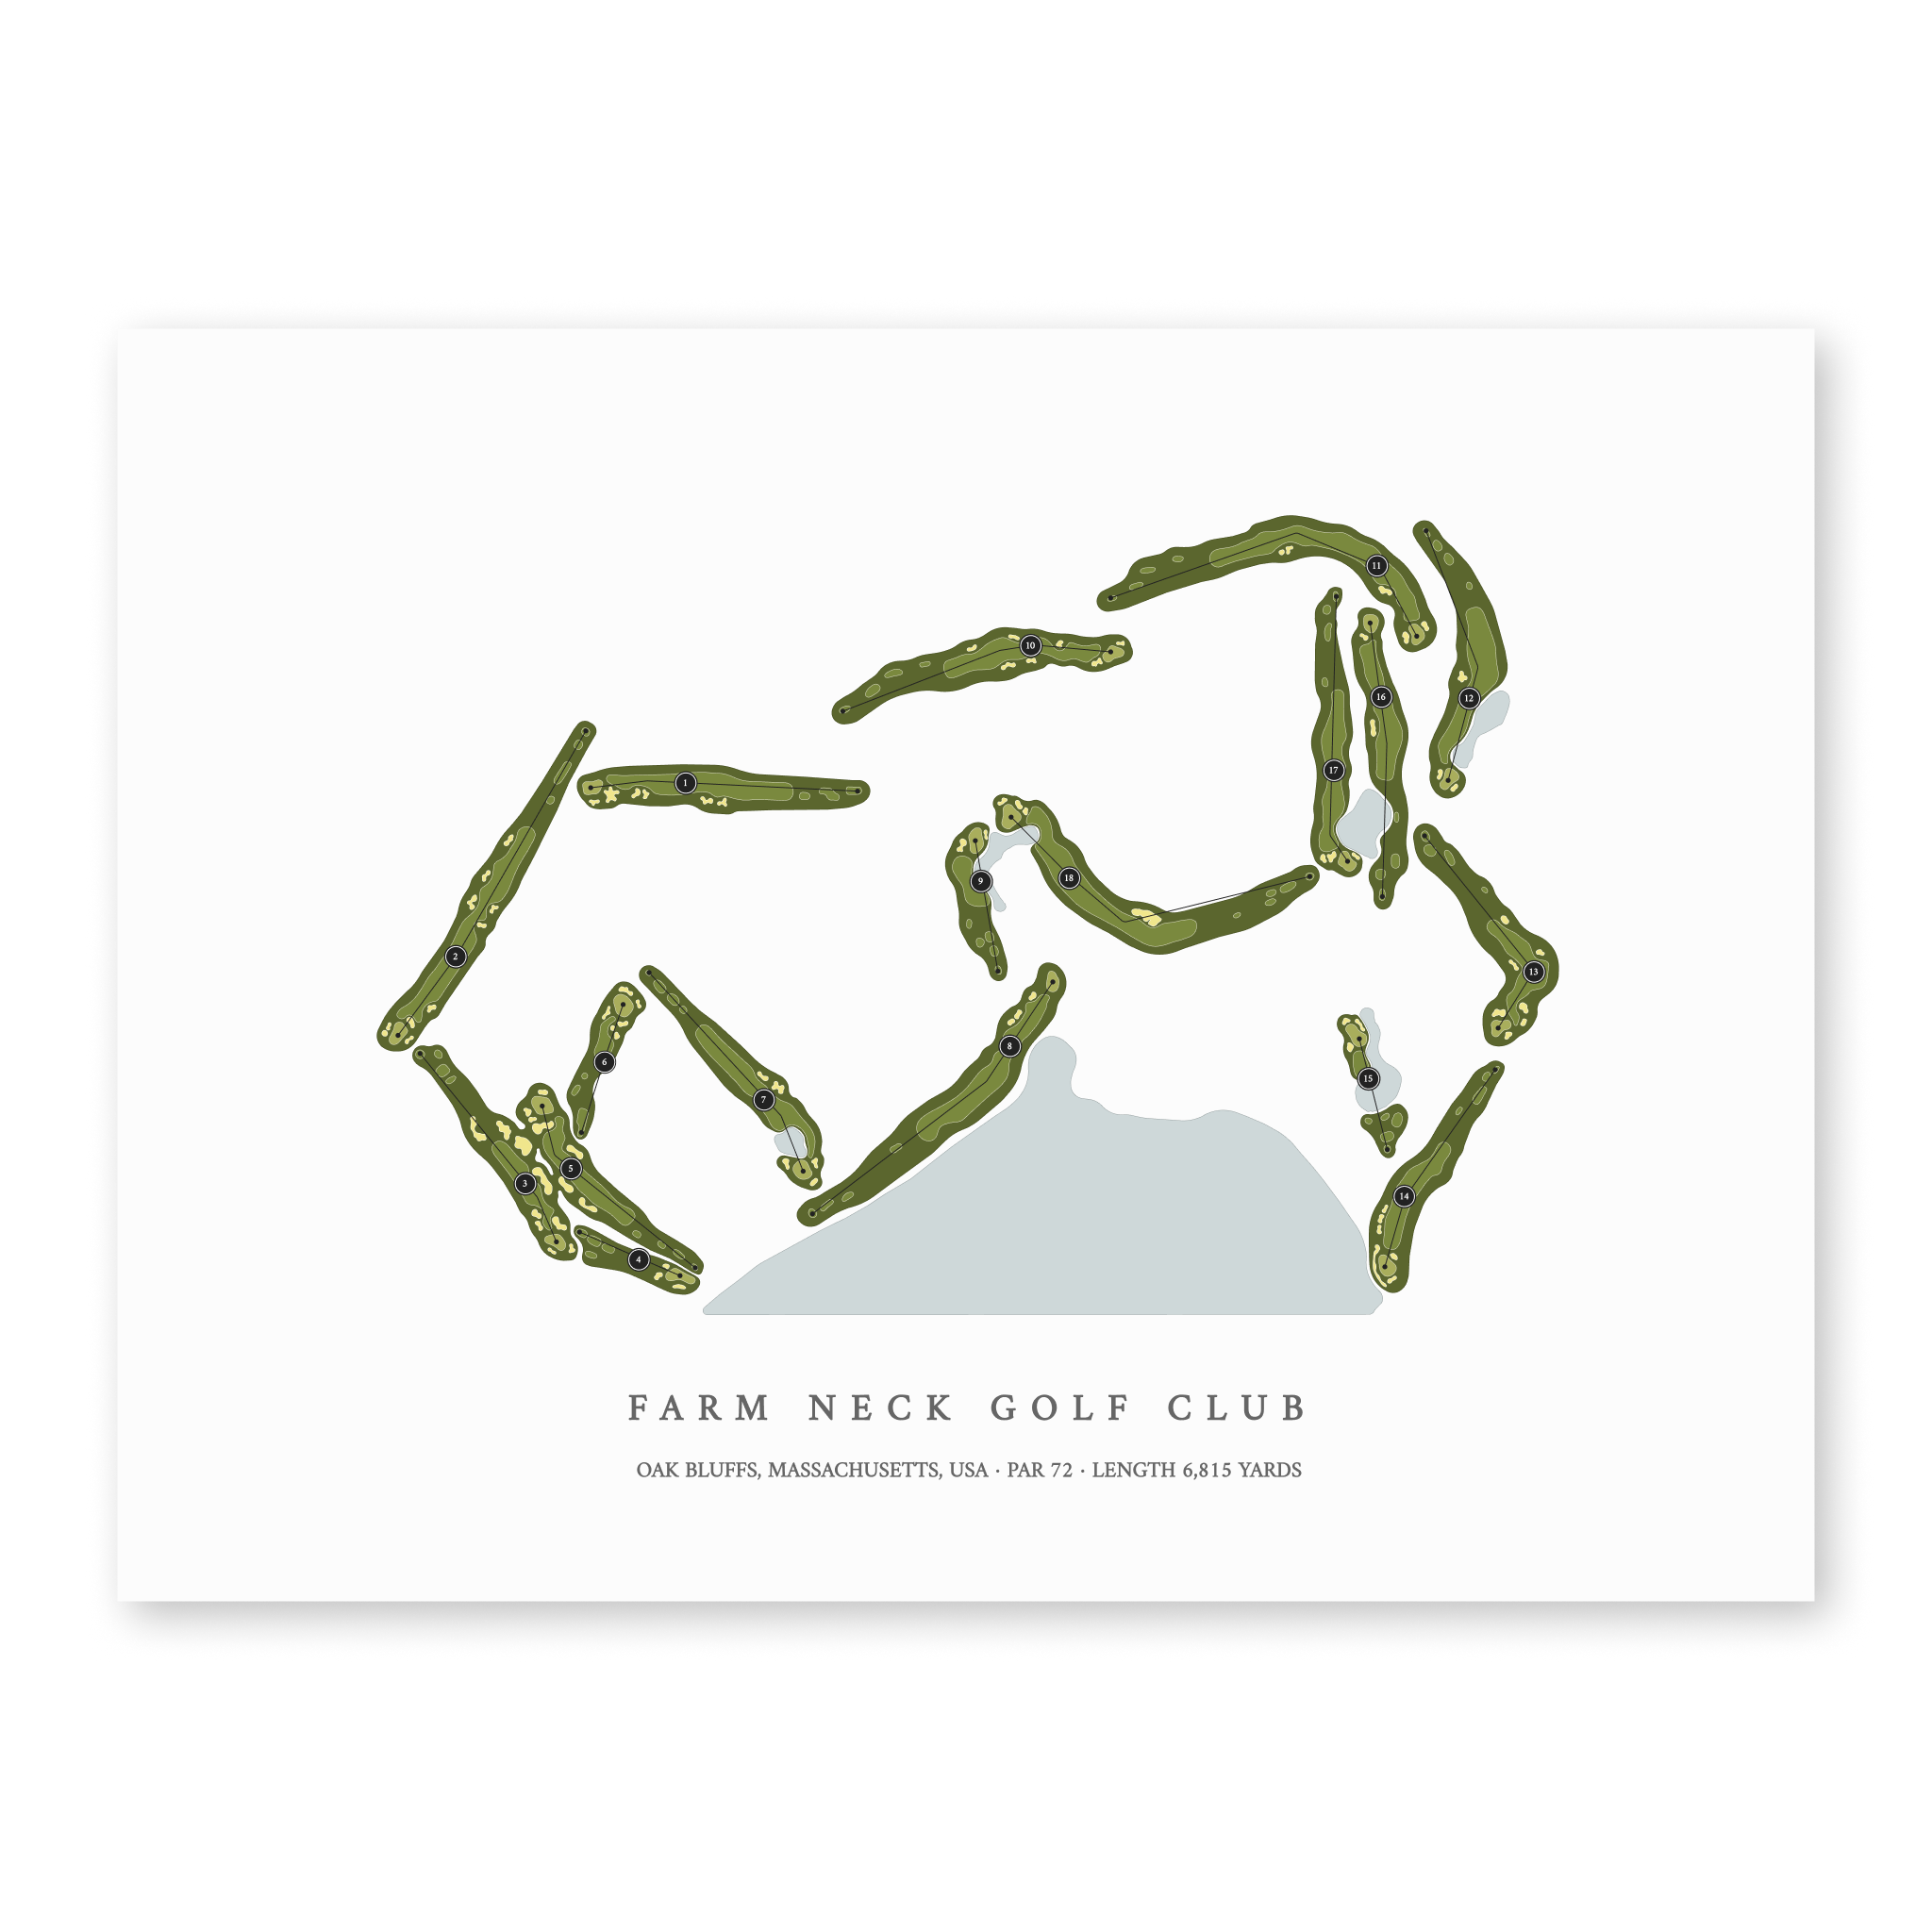 Farm Neck Golf Club| Golf Course Print | Unframed With Hole Numbers #hole numbers_yes